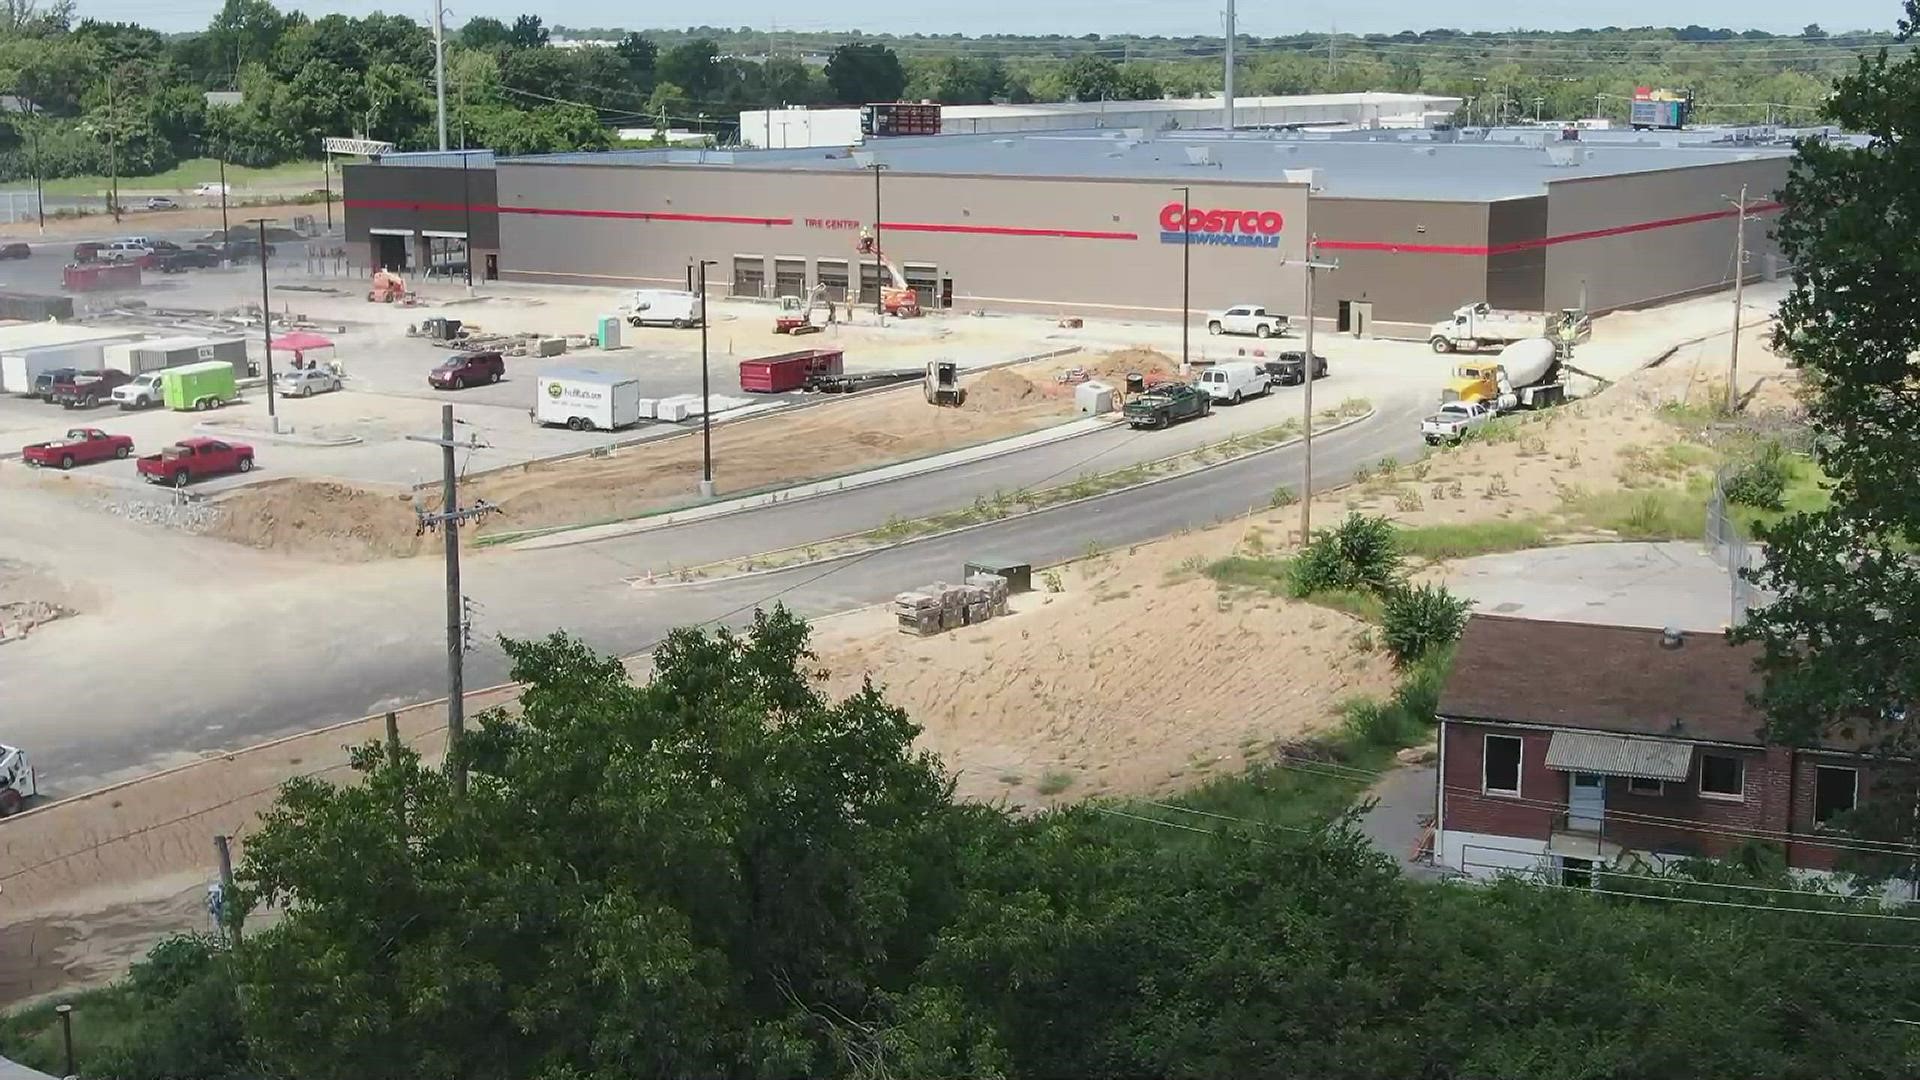 Construction is underway at a new retail development in University City that includes a Costco store.